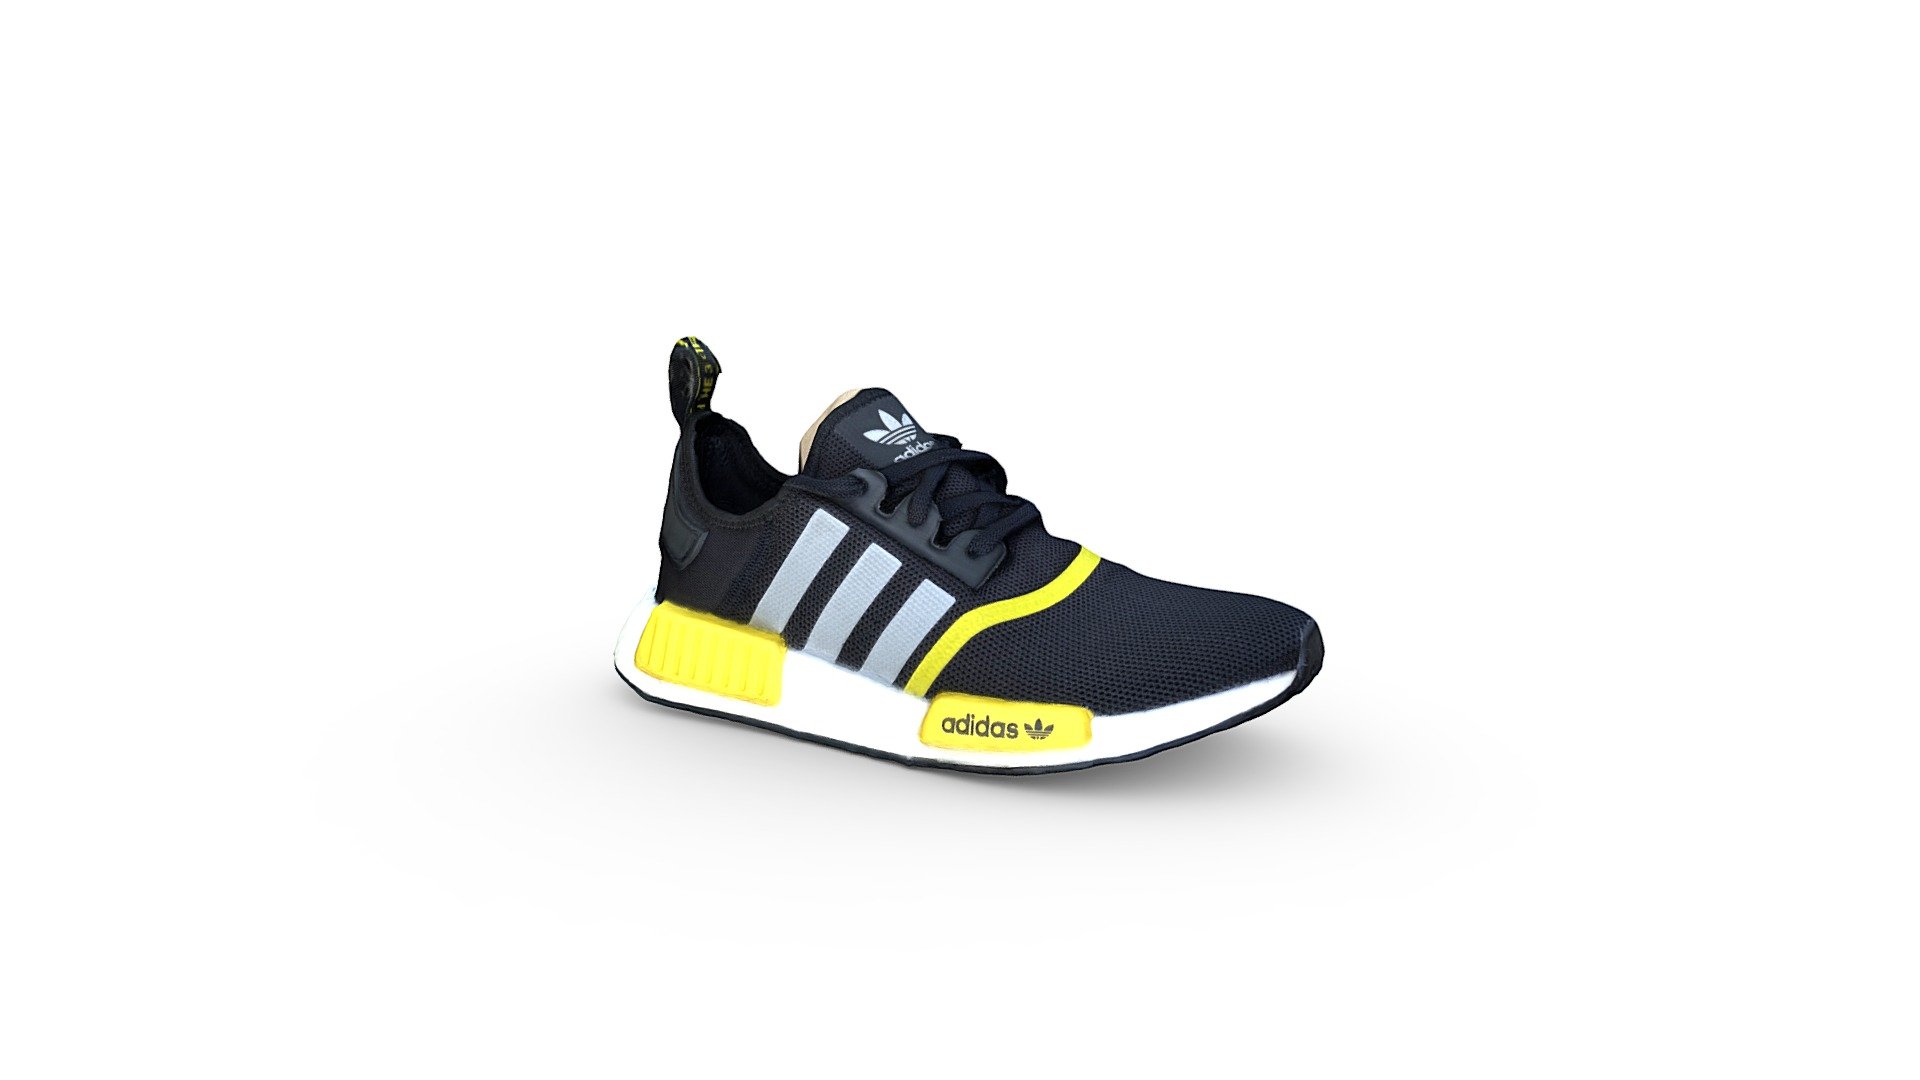 adidas - 3D by Cody.Meshberger (@Cody.Meshberger) [45ad205]